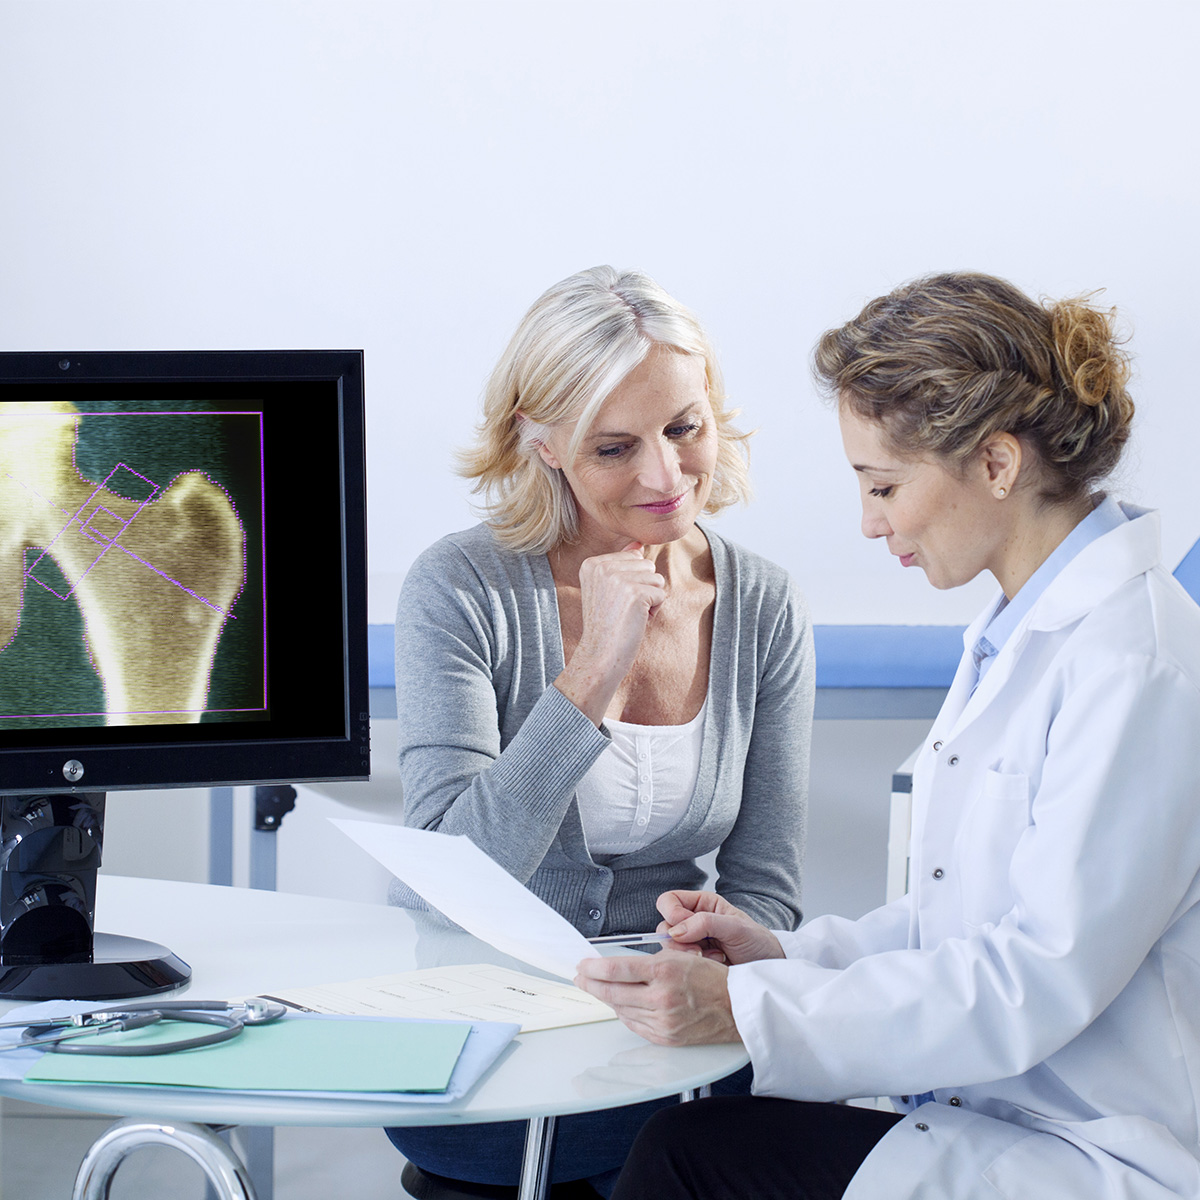 Female doctor and female patient with an x-ray on a computer screen